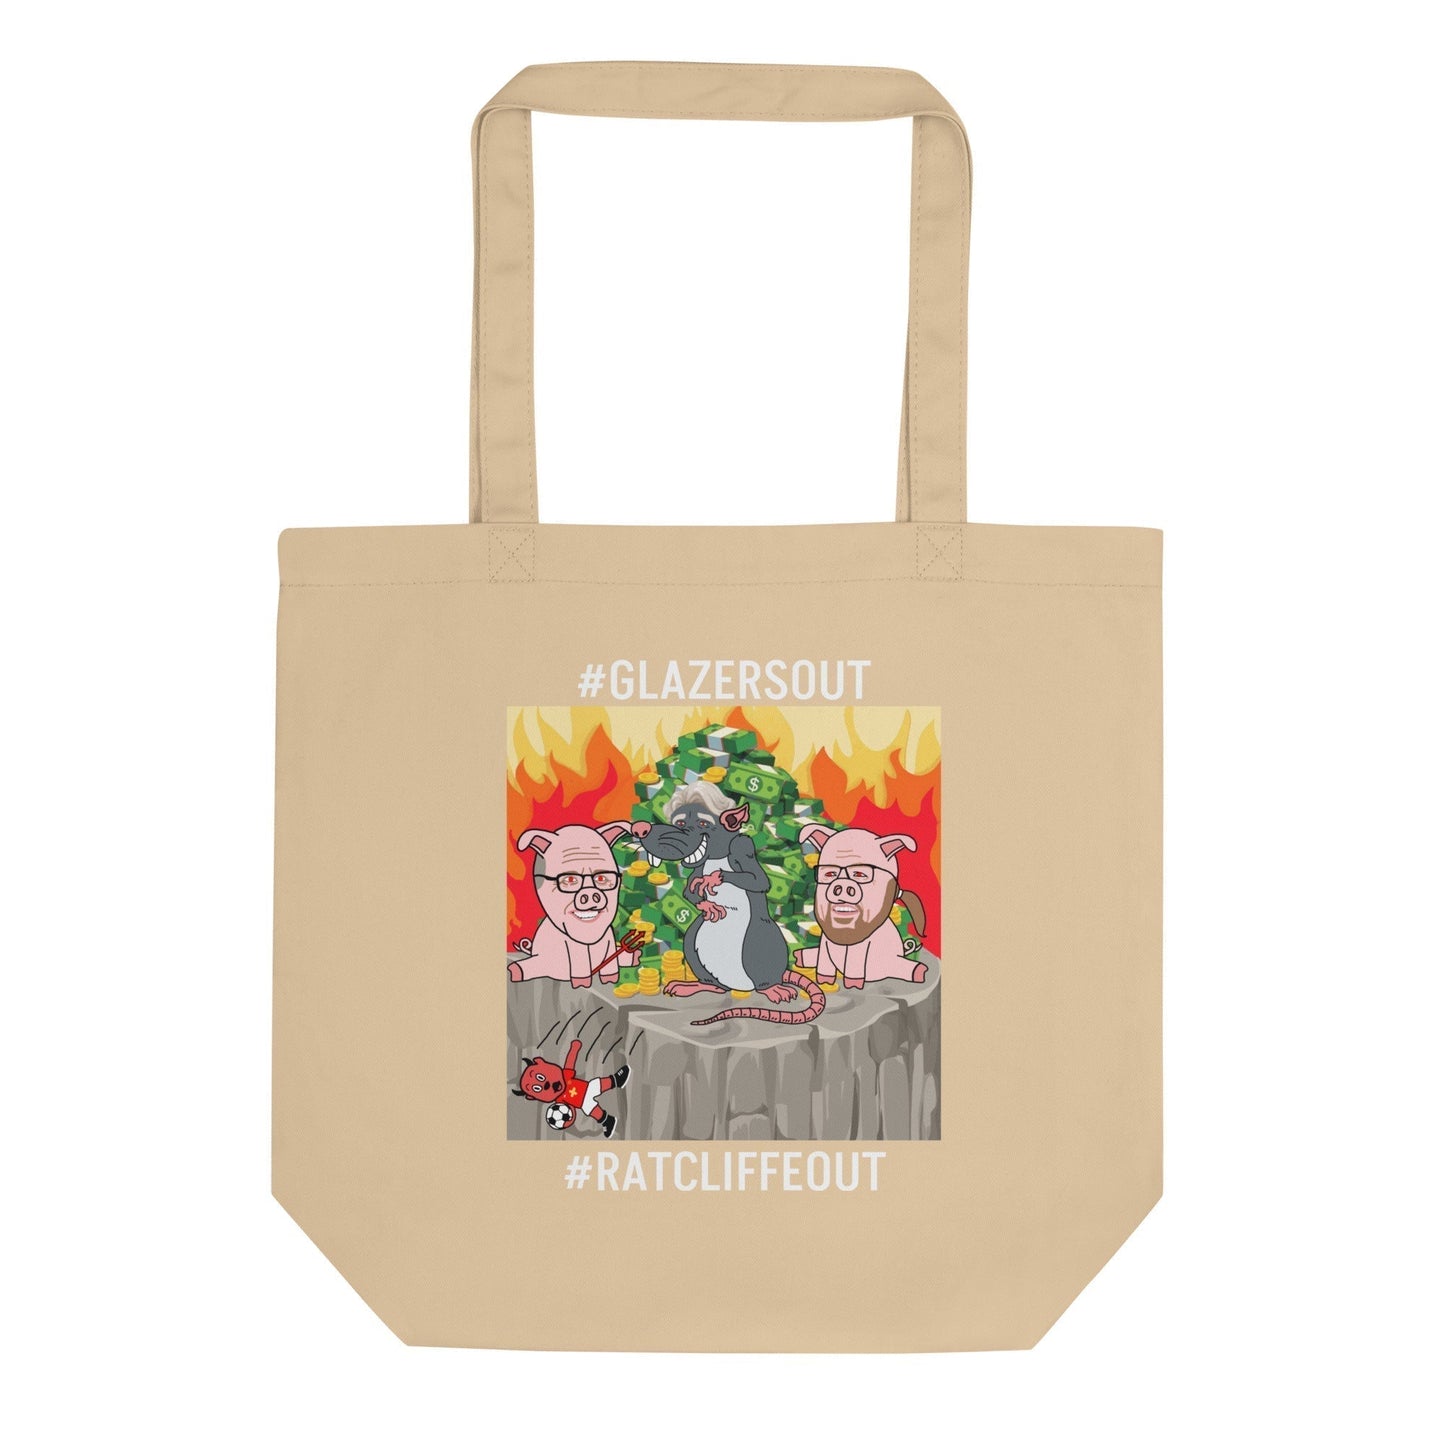 Manchester United Ratcliffe Out, Glazers Out Eco Tote Bag, Carryall Bag, Holdall Bag Next Cult Brand Football, GlazersOut, Manchester United, RatcliffeOut